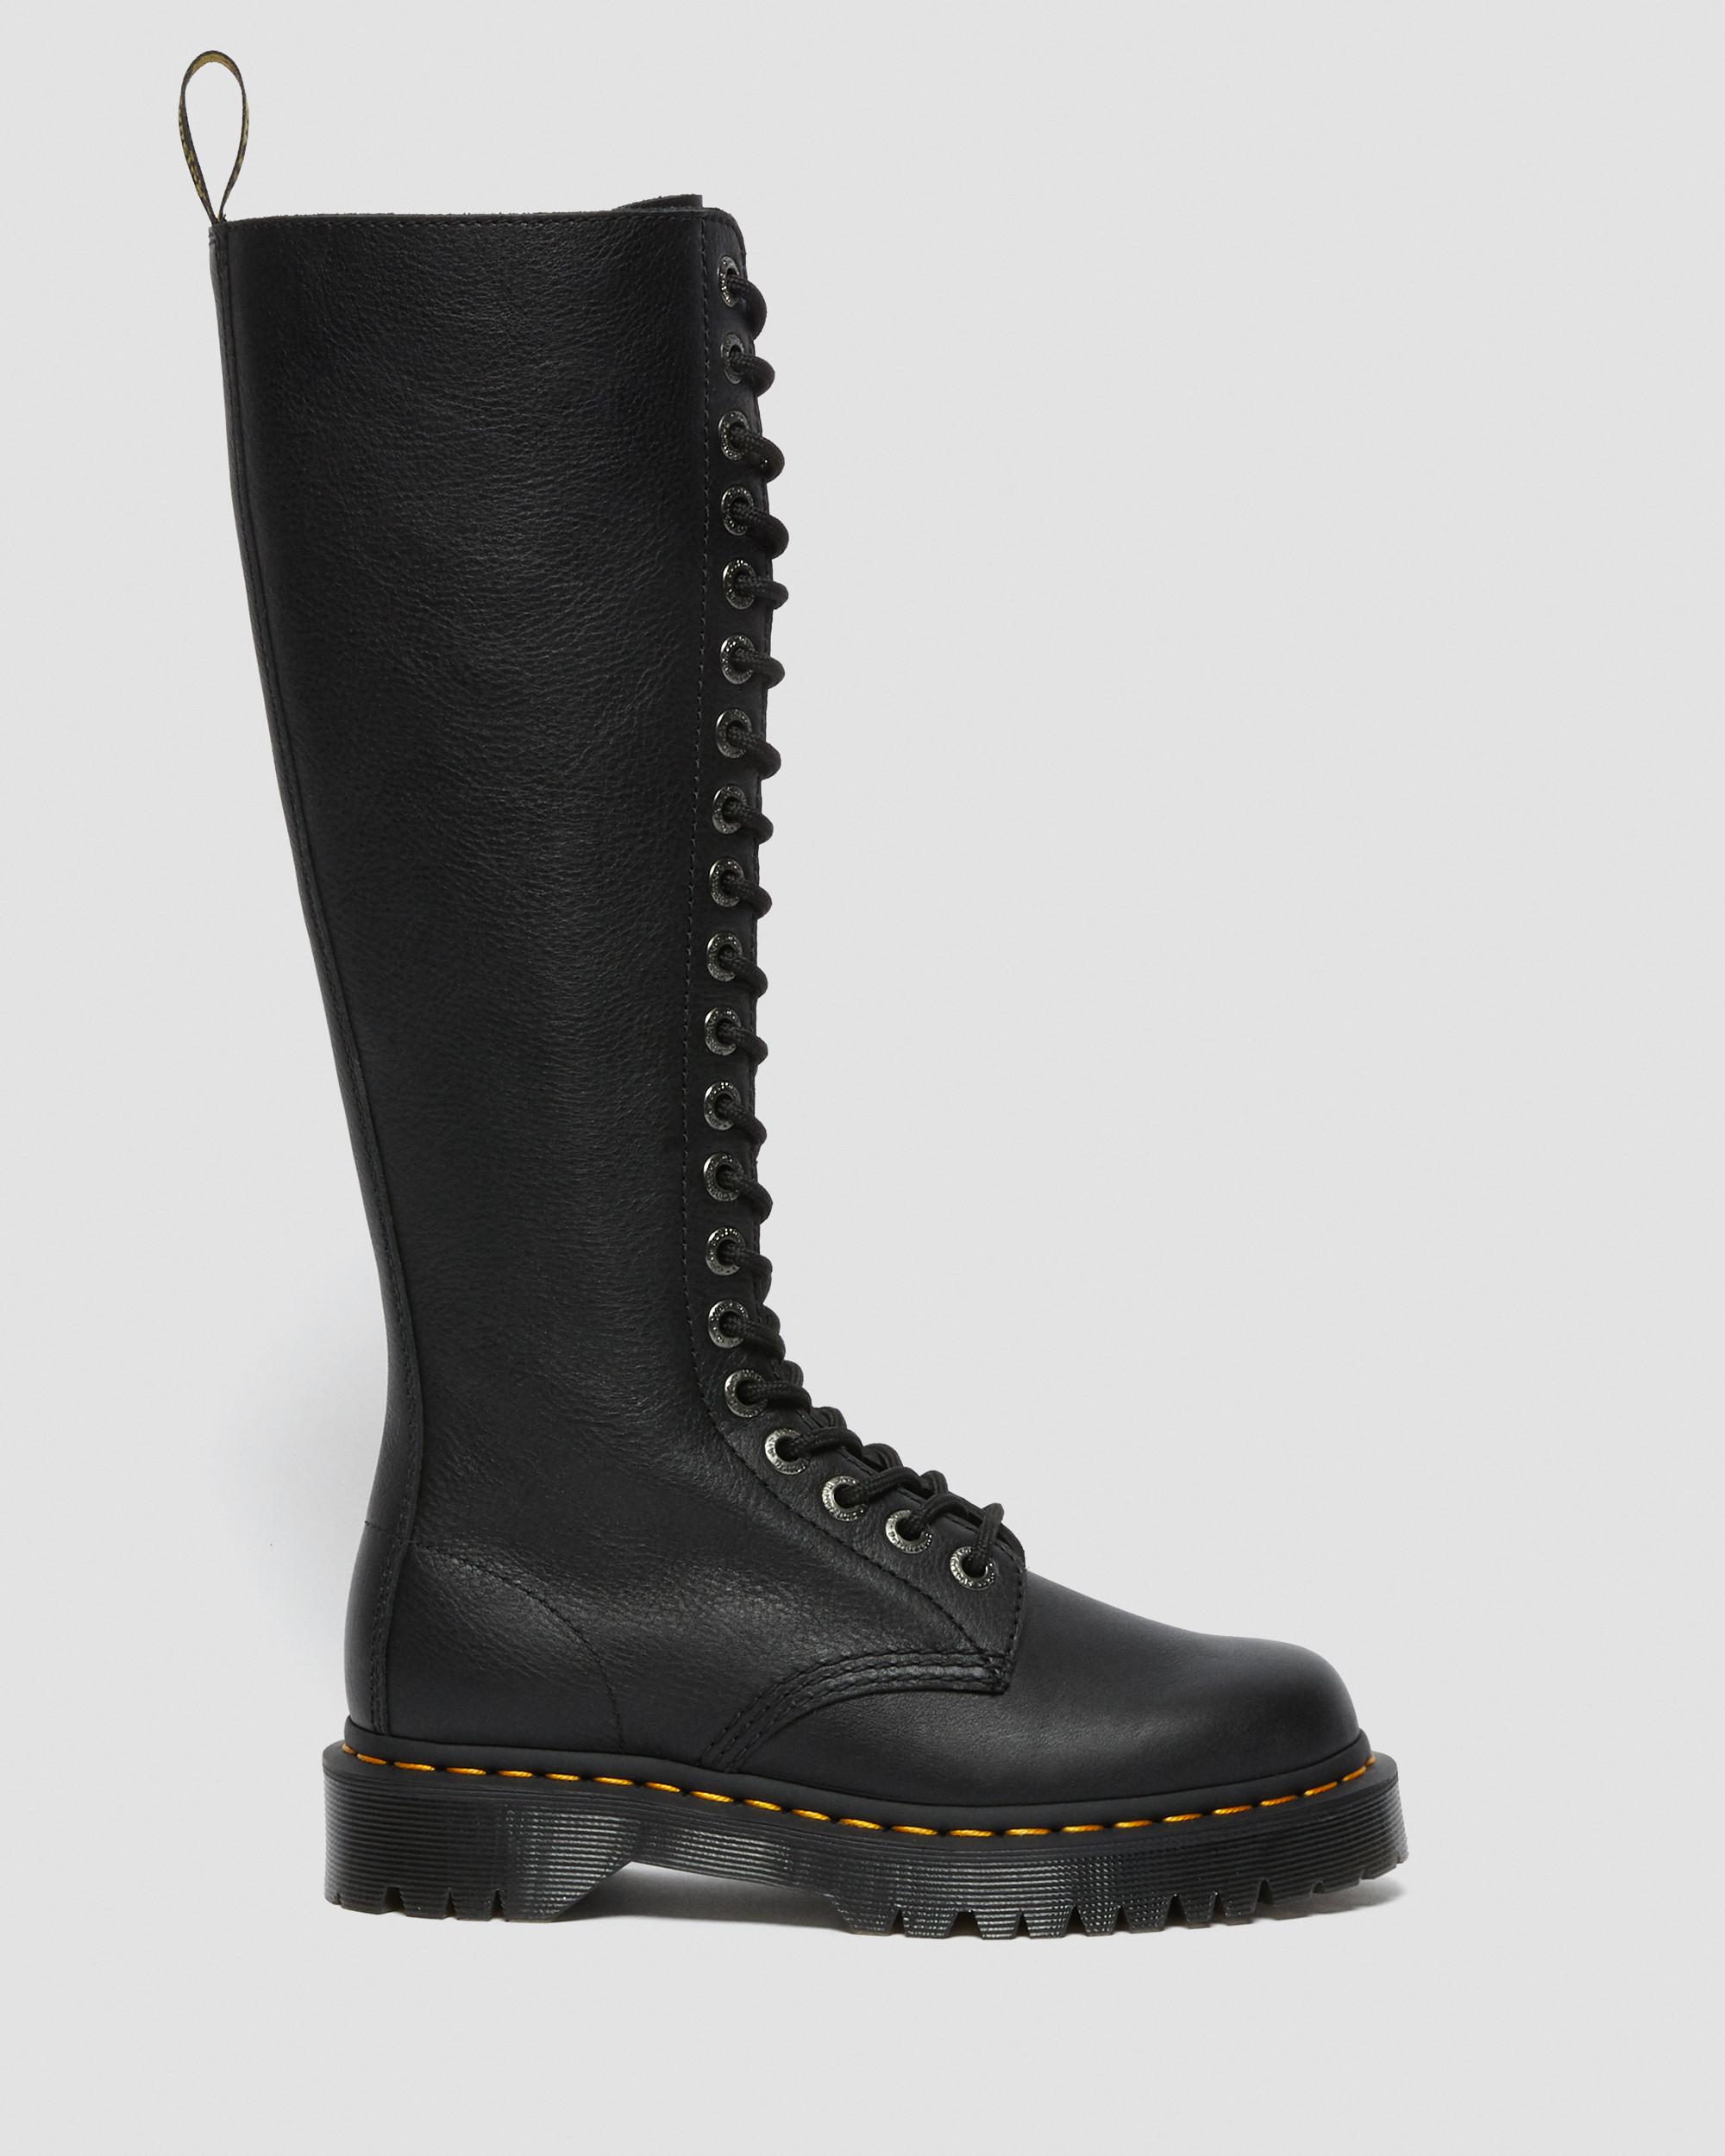 1B60 Bex Pisa Leather Knee High Boots in Black | Dr. Martens